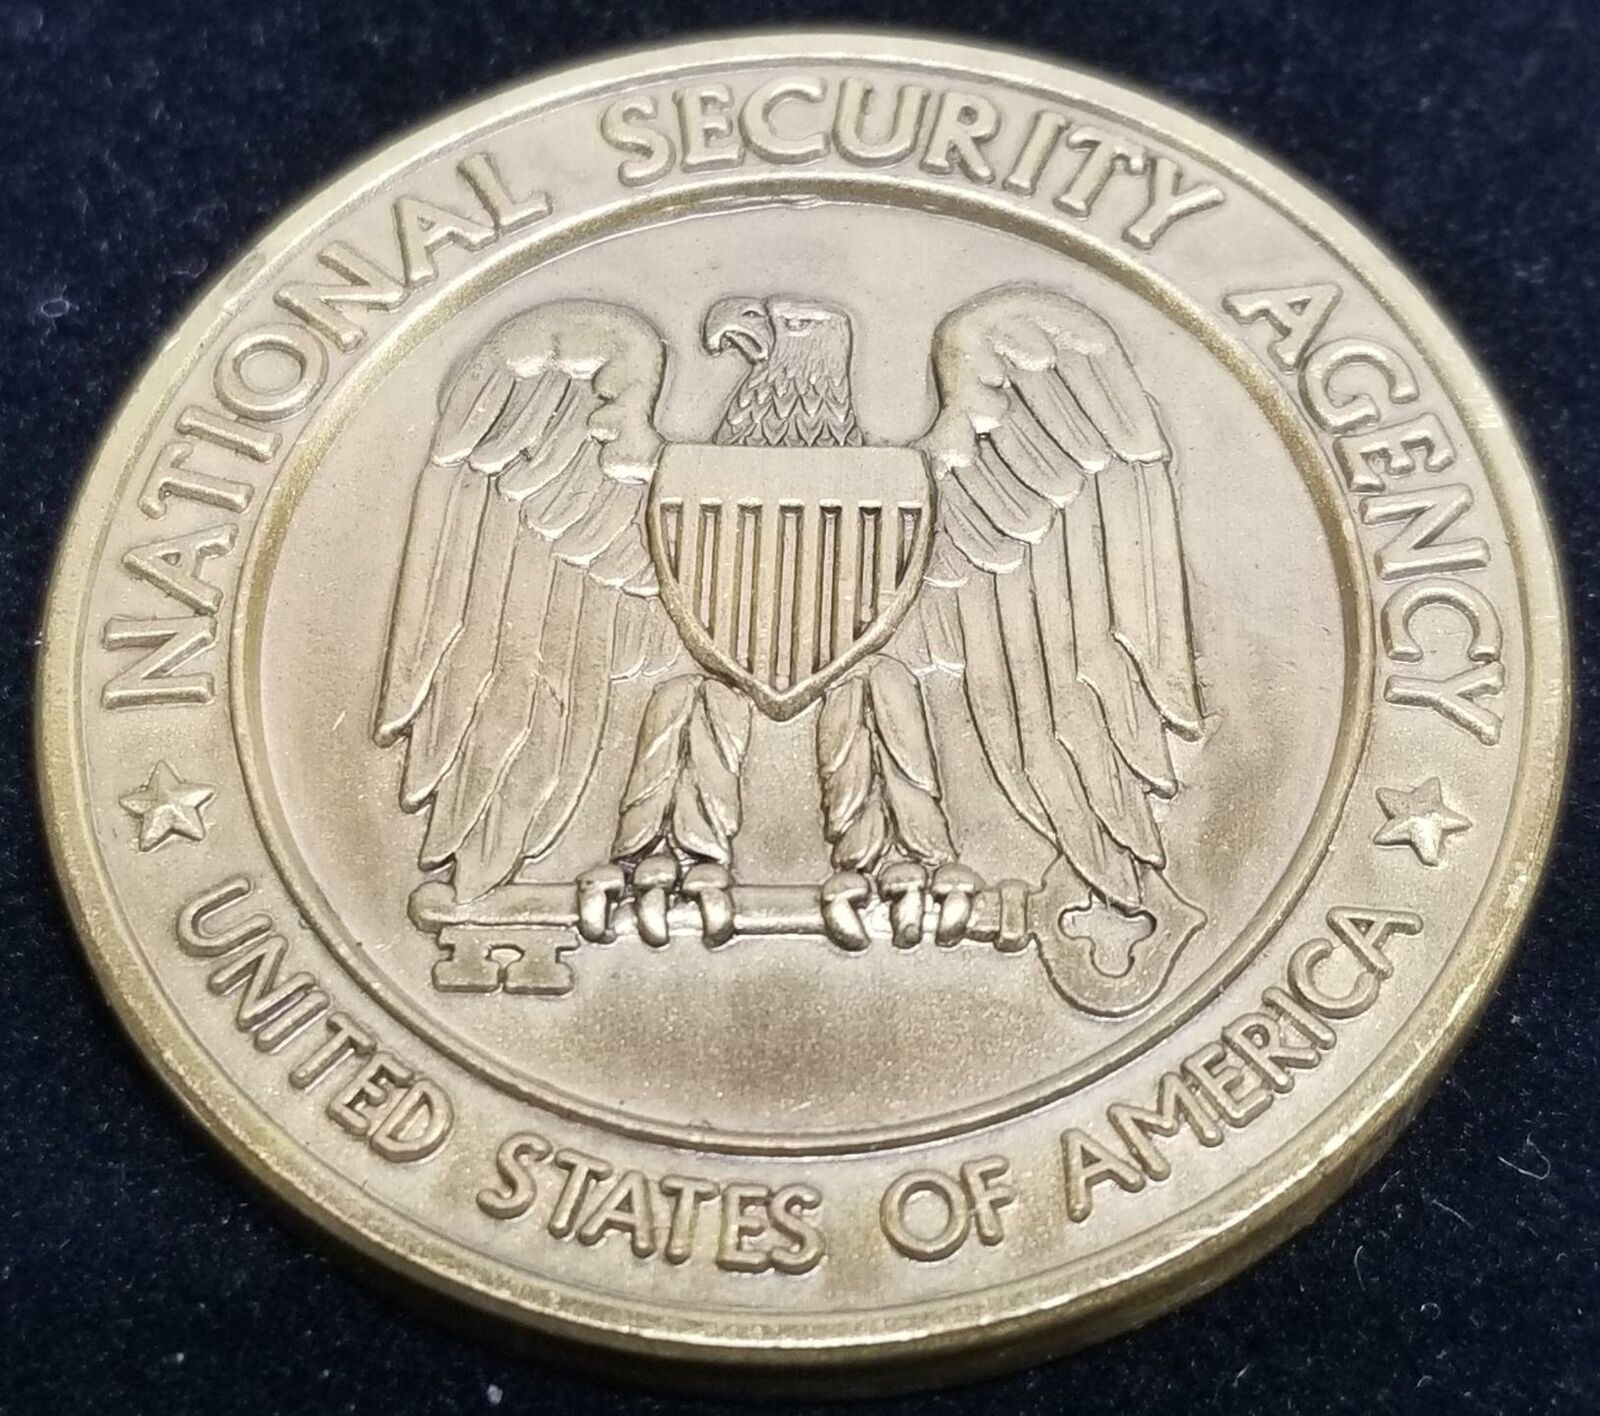 NSA National Security Agency Crypto Cryptography Challenge Coin